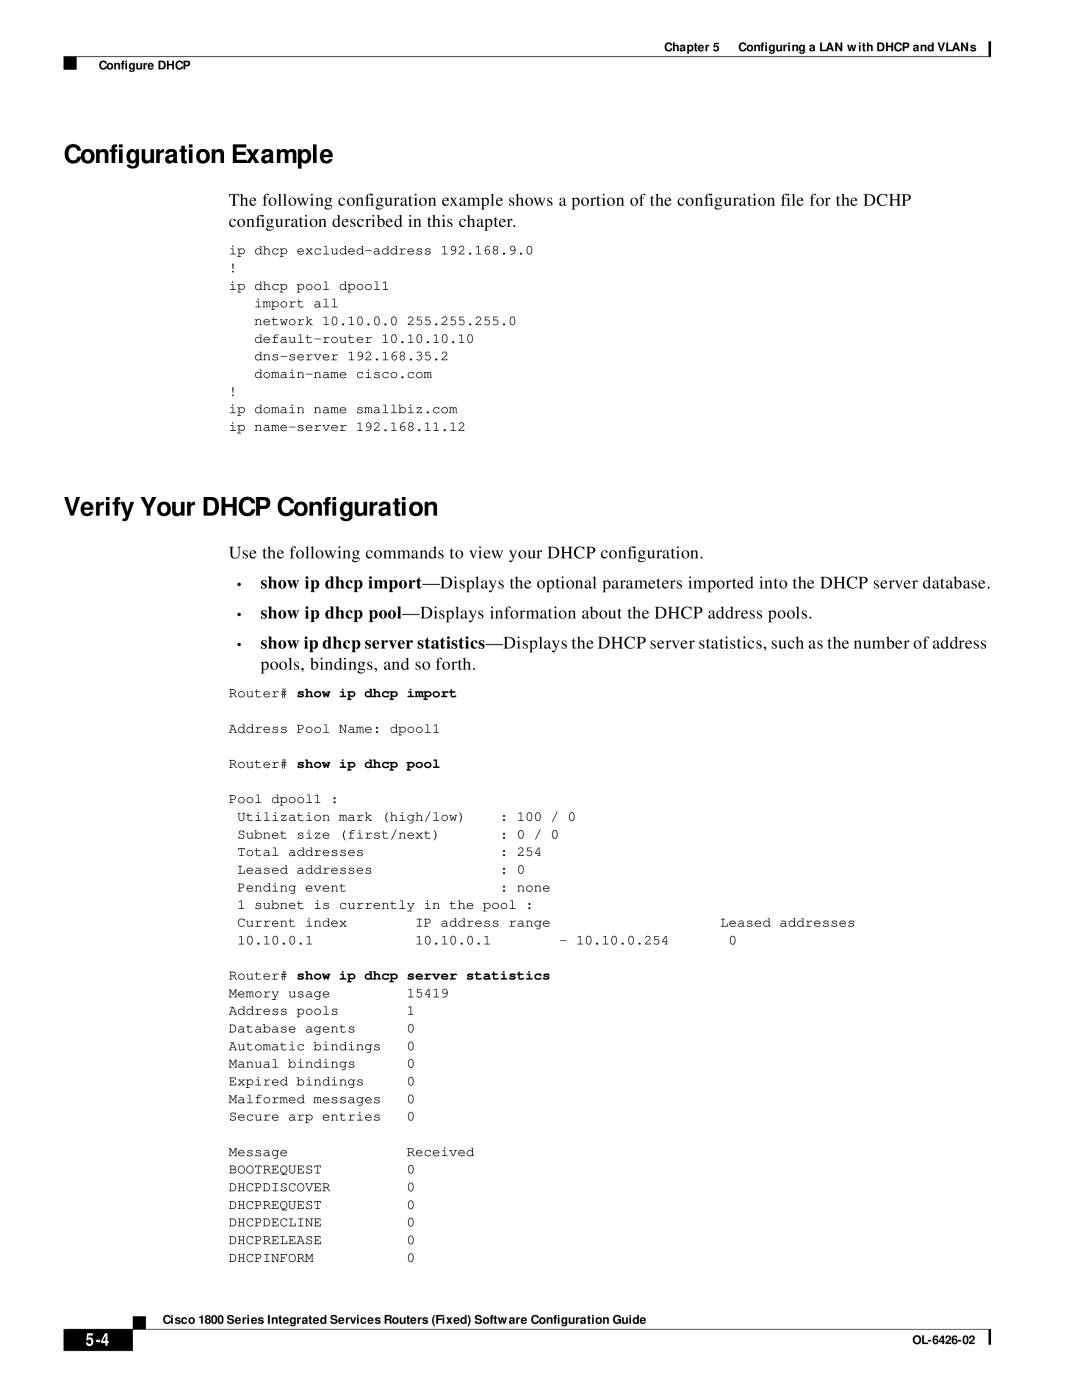 Cisco Systems 1800 manual Configuration Example, Verify Your DHCP Configuration 